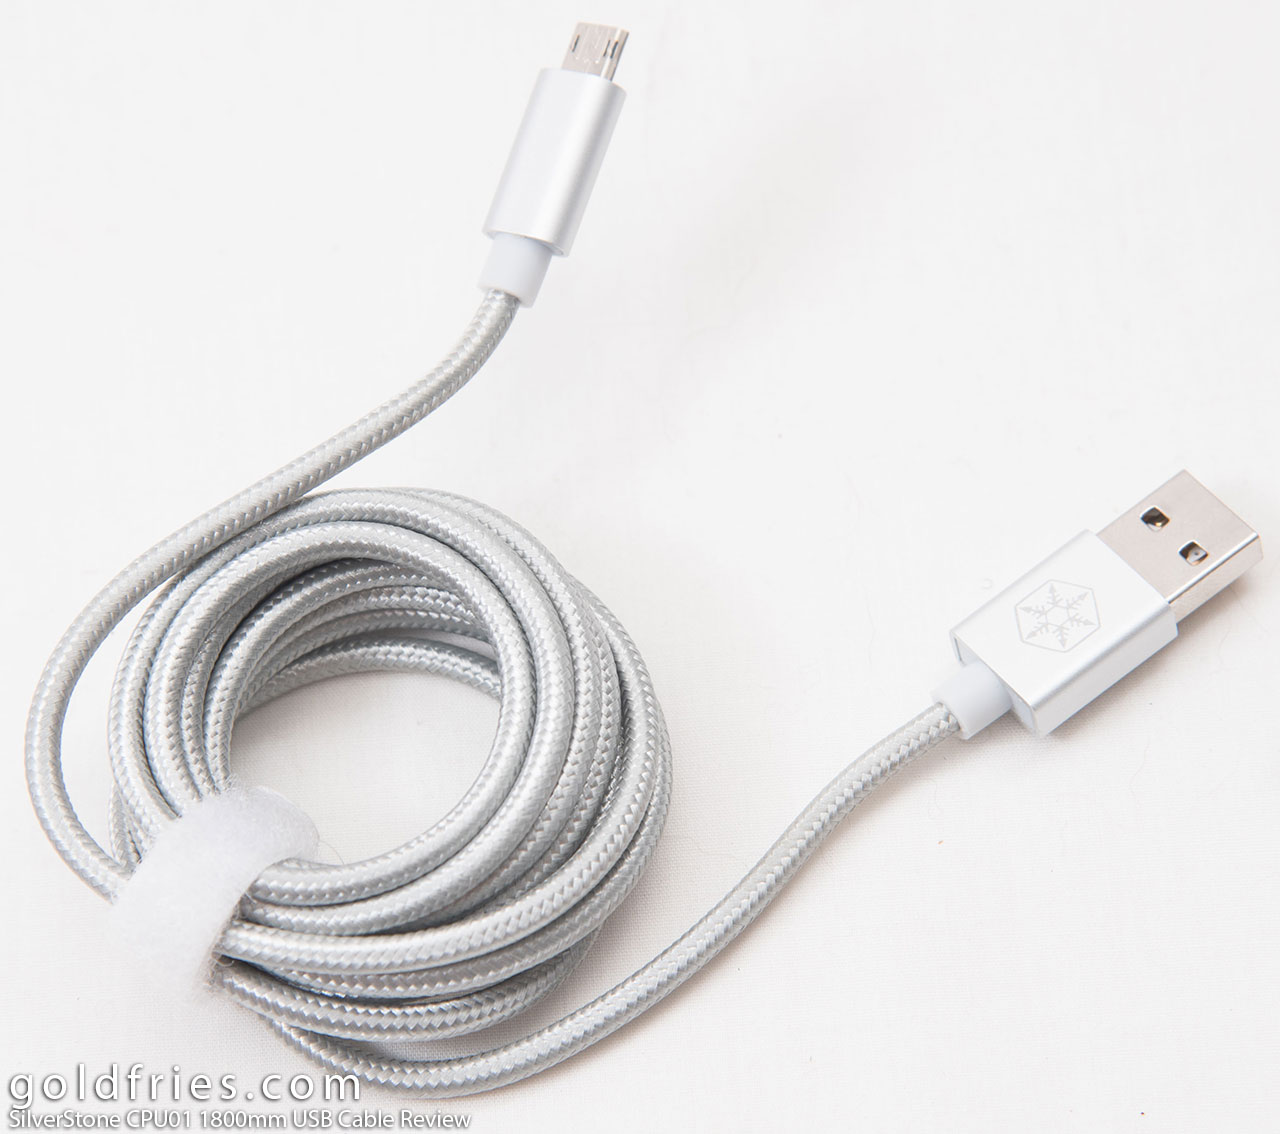 SilverStone CPU01 500mm USB Cable Review